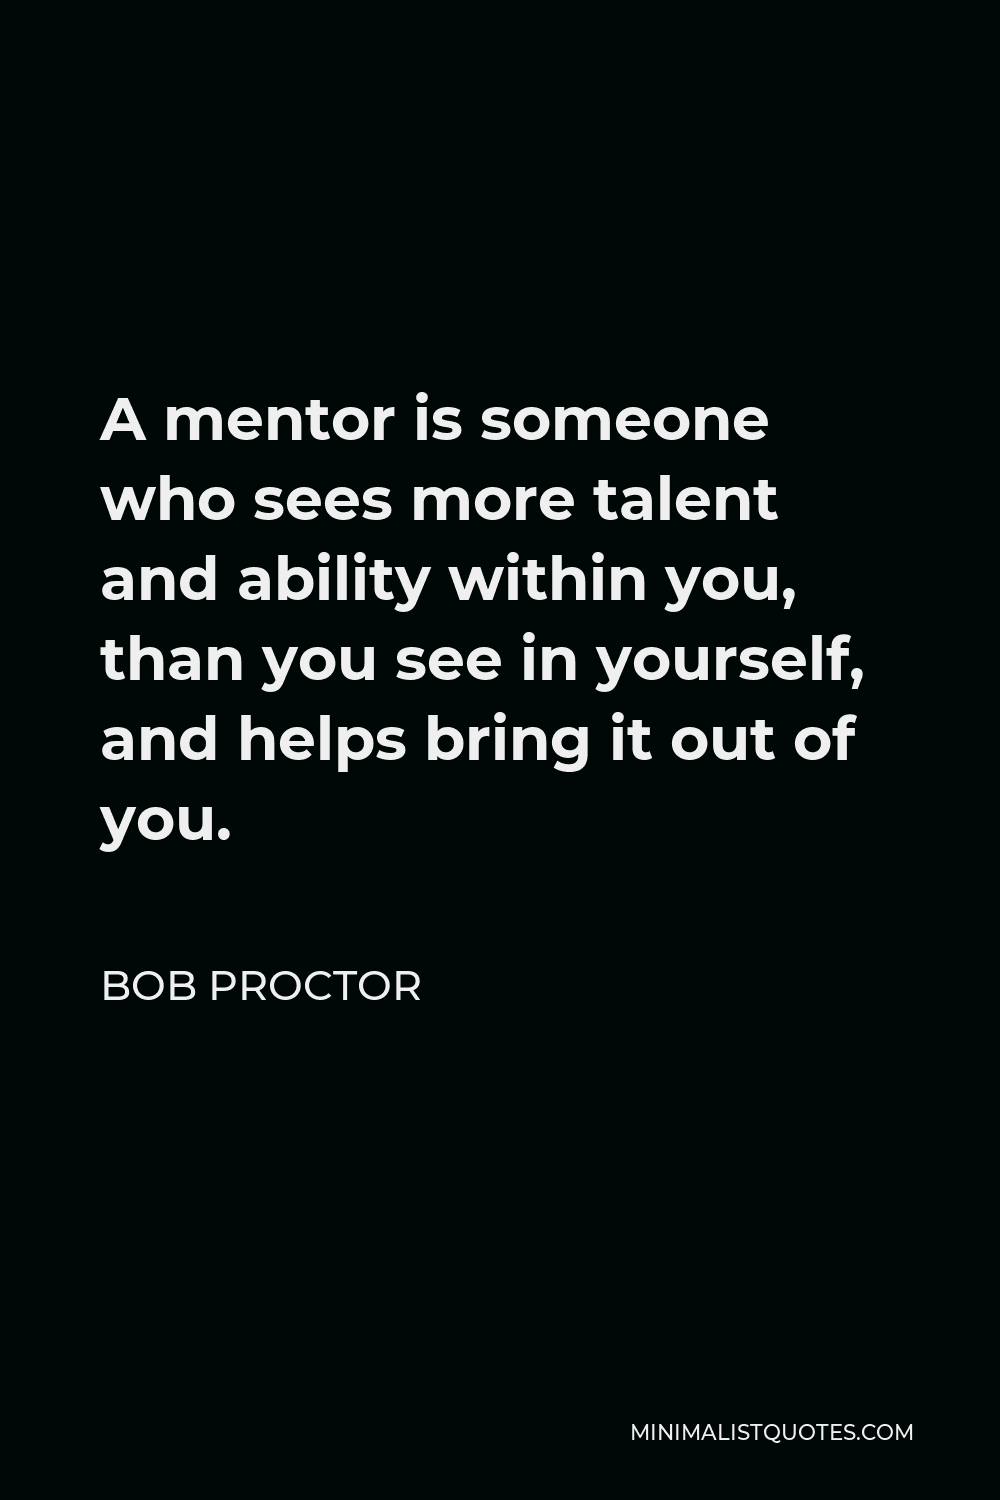 Bob Proctor Quote - A mentor is someone who sees more talent and ability within you, than you see in yourself, and helps bring it out of you.